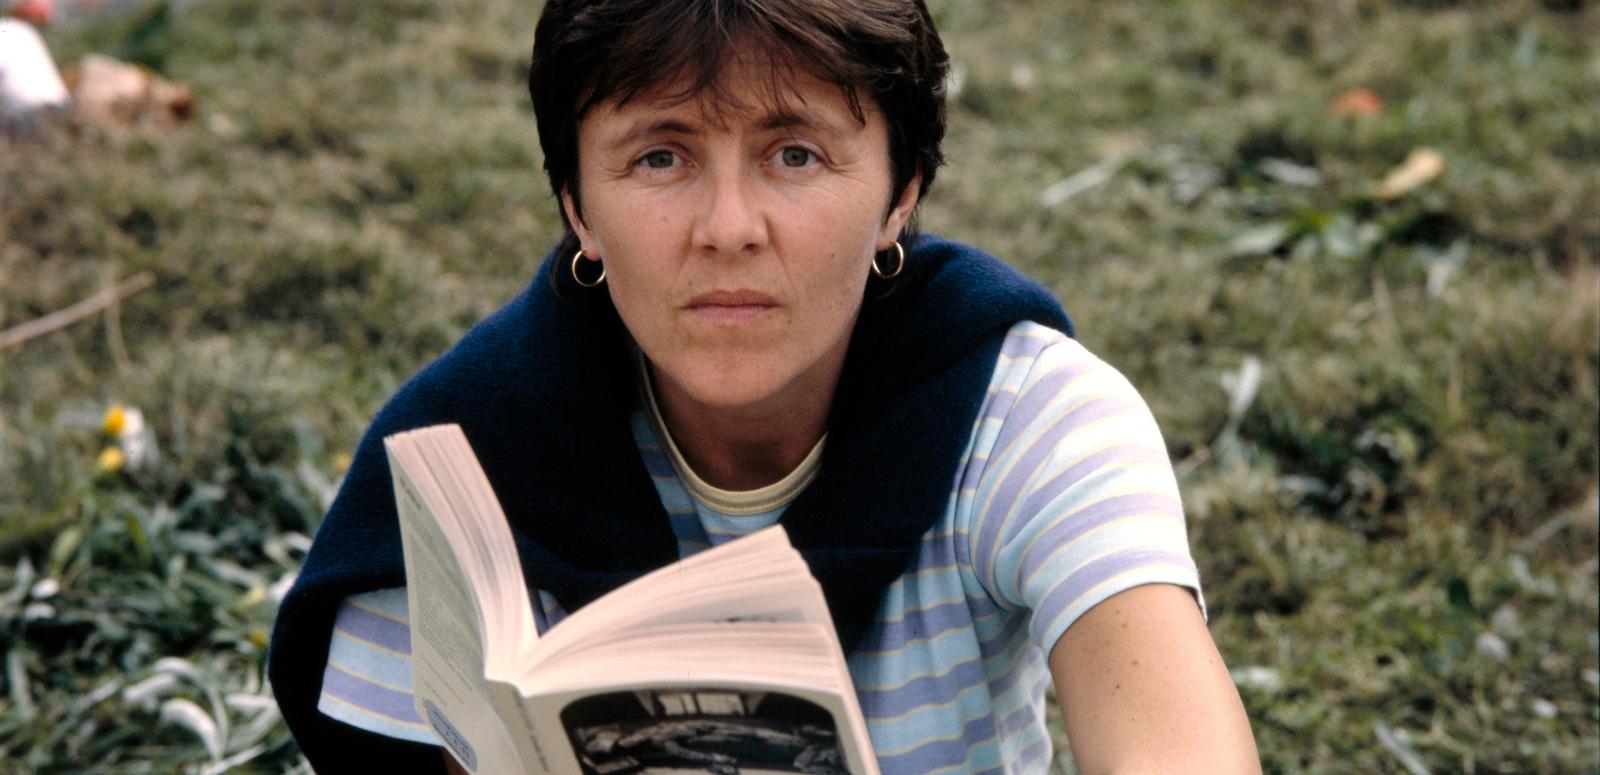 Helen Garner sitting in the ground, look at the camera and holding an open book